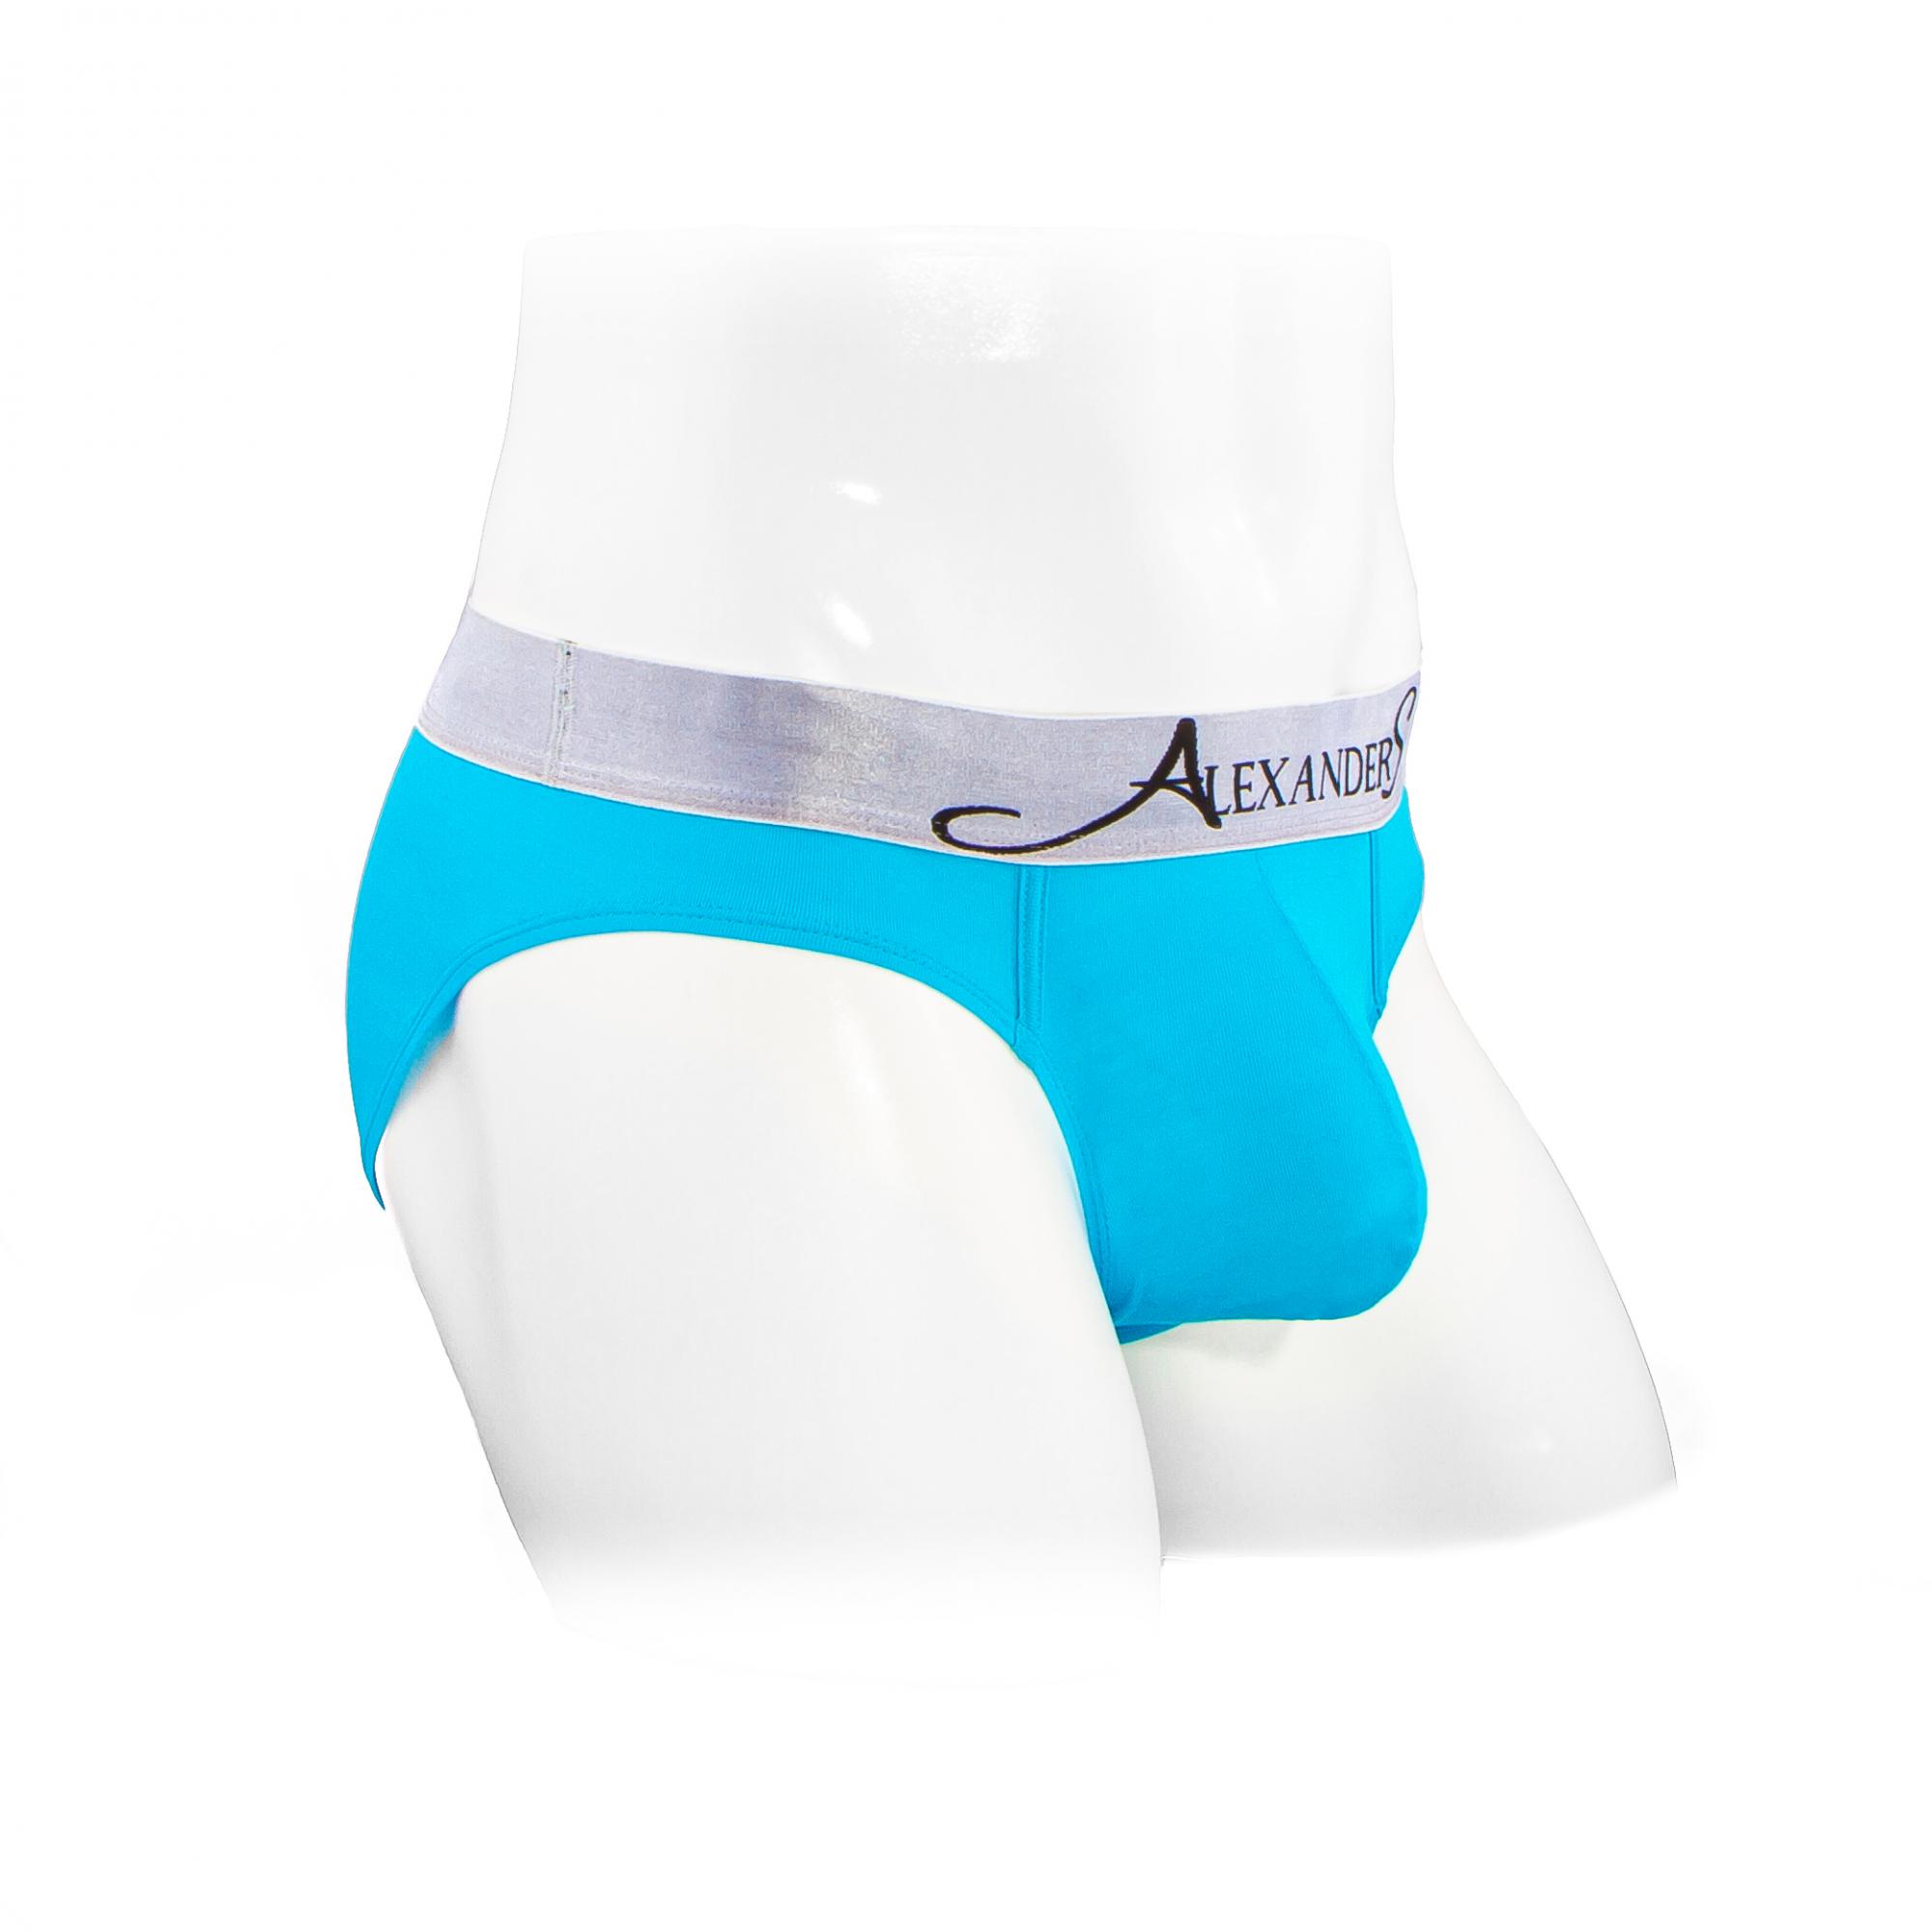 Shop men's underwear at AlexanderS for multipacks, hipsters, classic briefs, and more. Find the best coverage, colours, and styles all in one package.